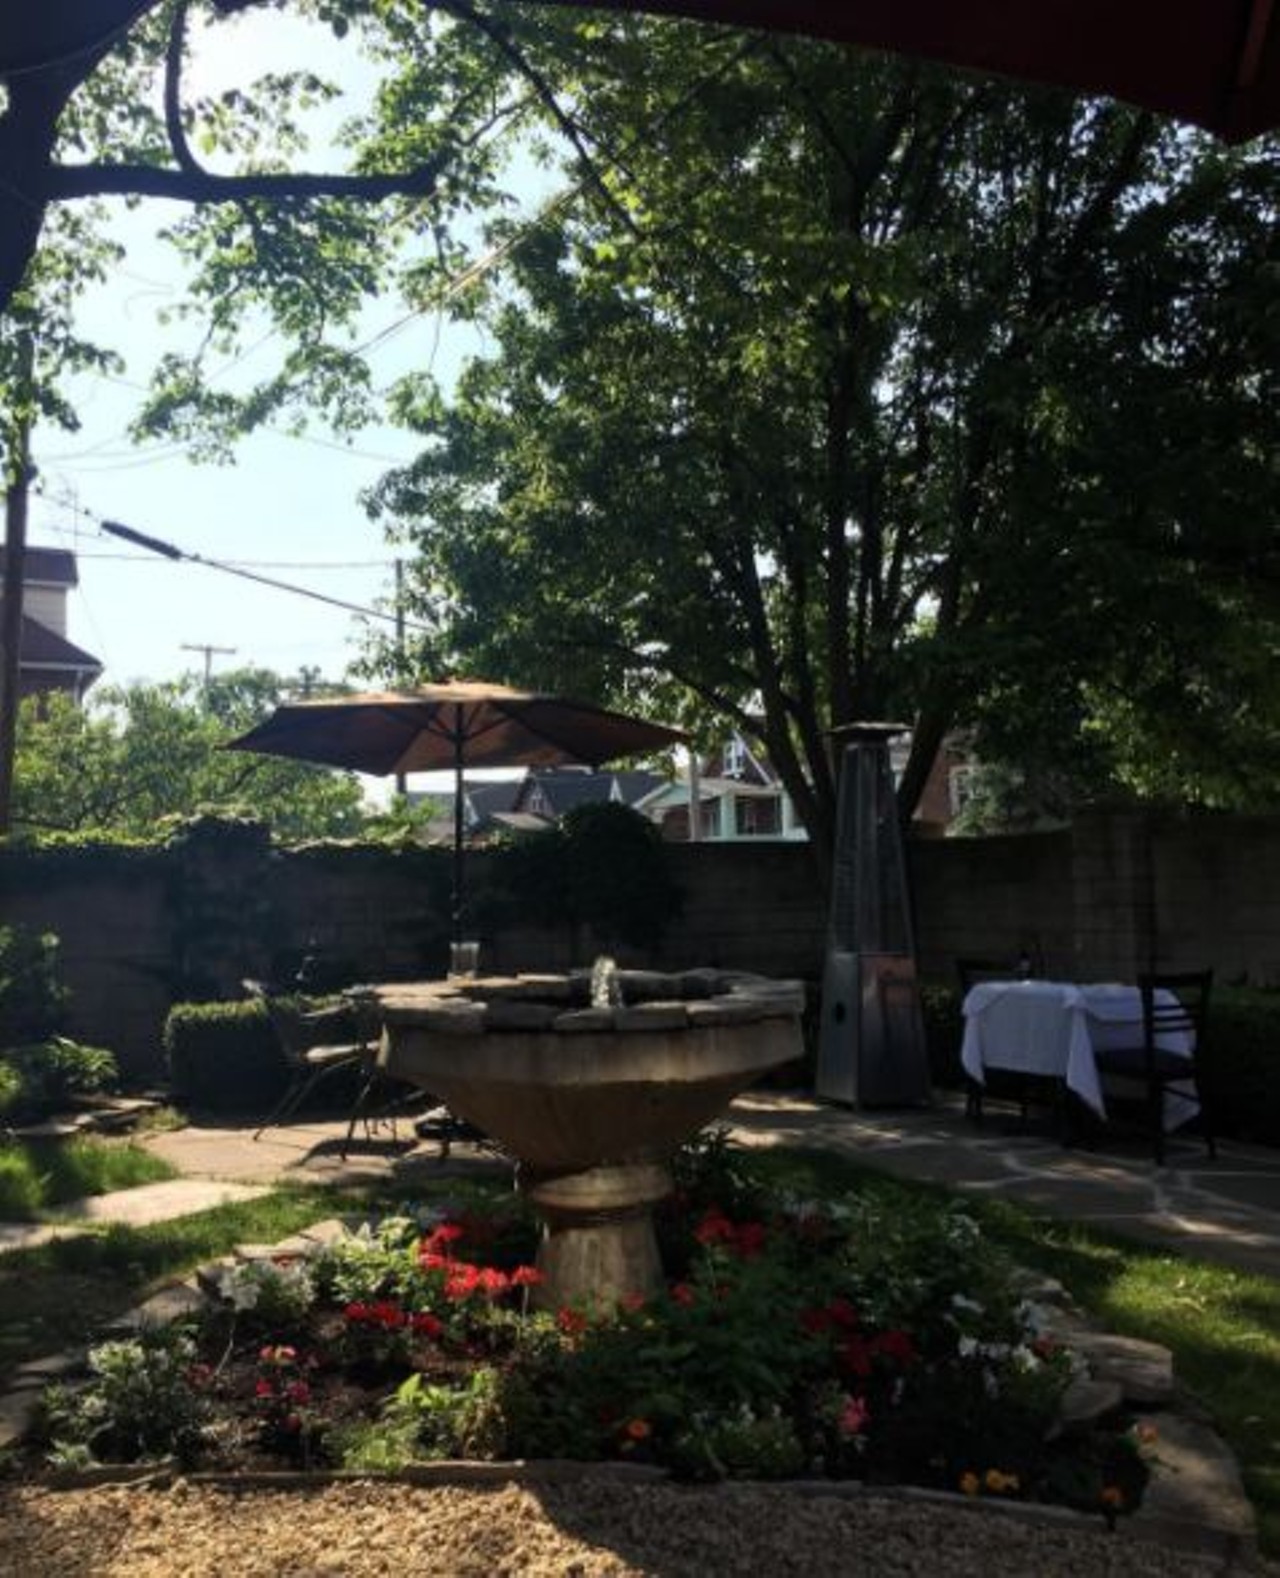  Johnny&#146;s Bar
3164 Fulton Rd, Cleveland
While Johnny's downtown location also offers a patio where you can dive into their long-standing Italian menu, Johnny's on Fulton houses a truly enchanting outdoor seating area.
Photo via @woozie13/Instagram